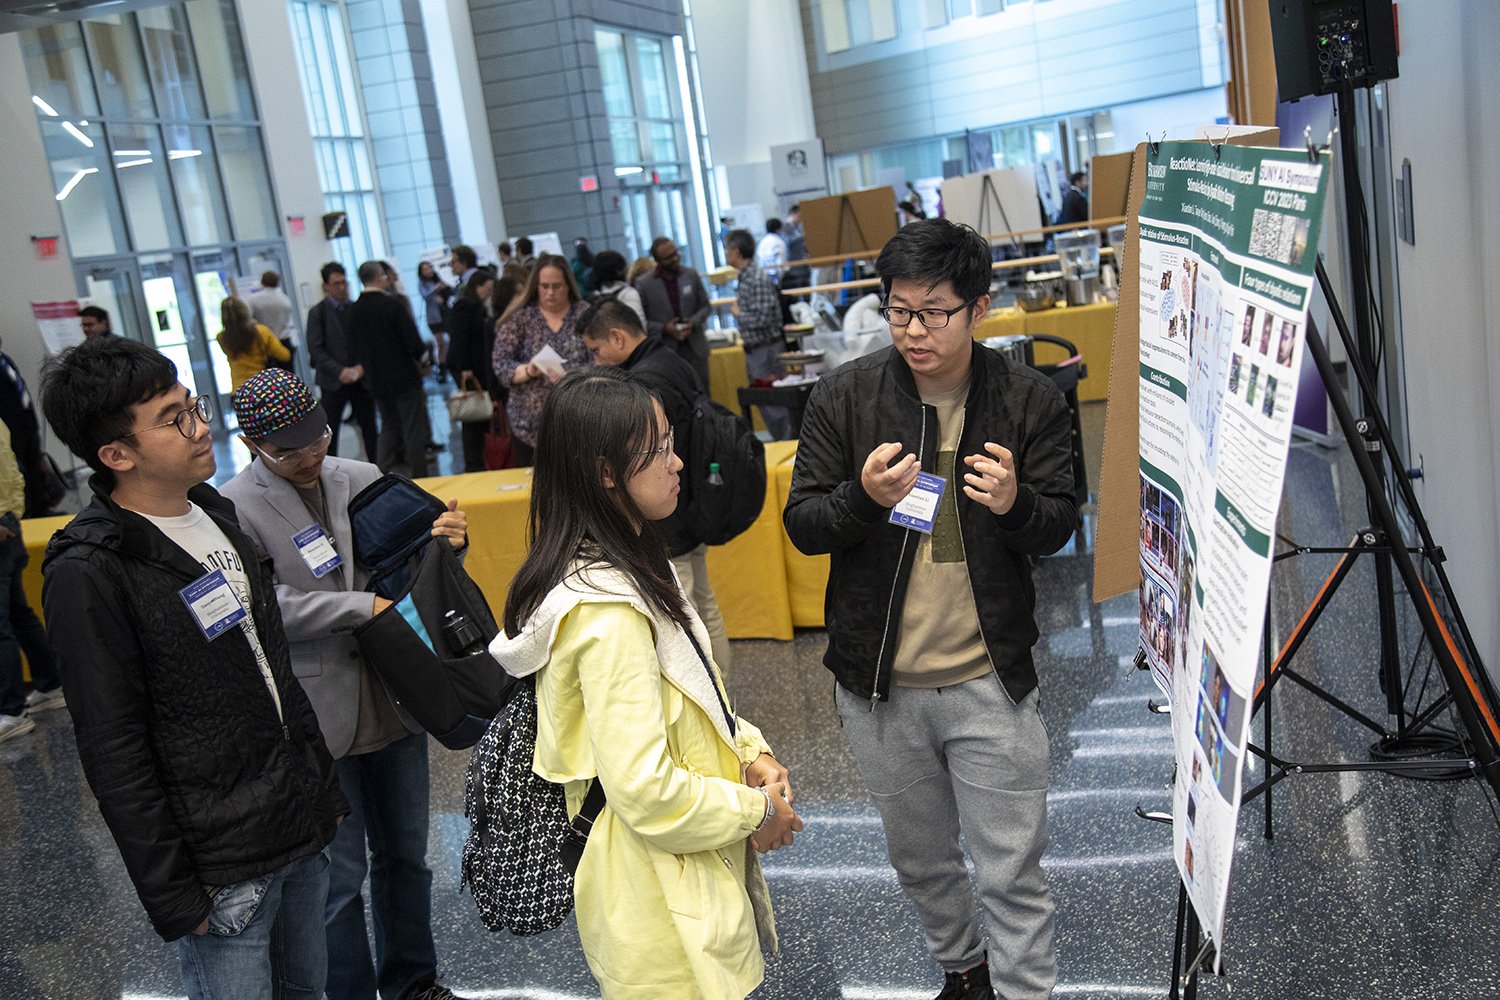 Students present at the SUNY AI Symposium on Oct. 16 at ETEC. (Photo by Patrick Dodson)